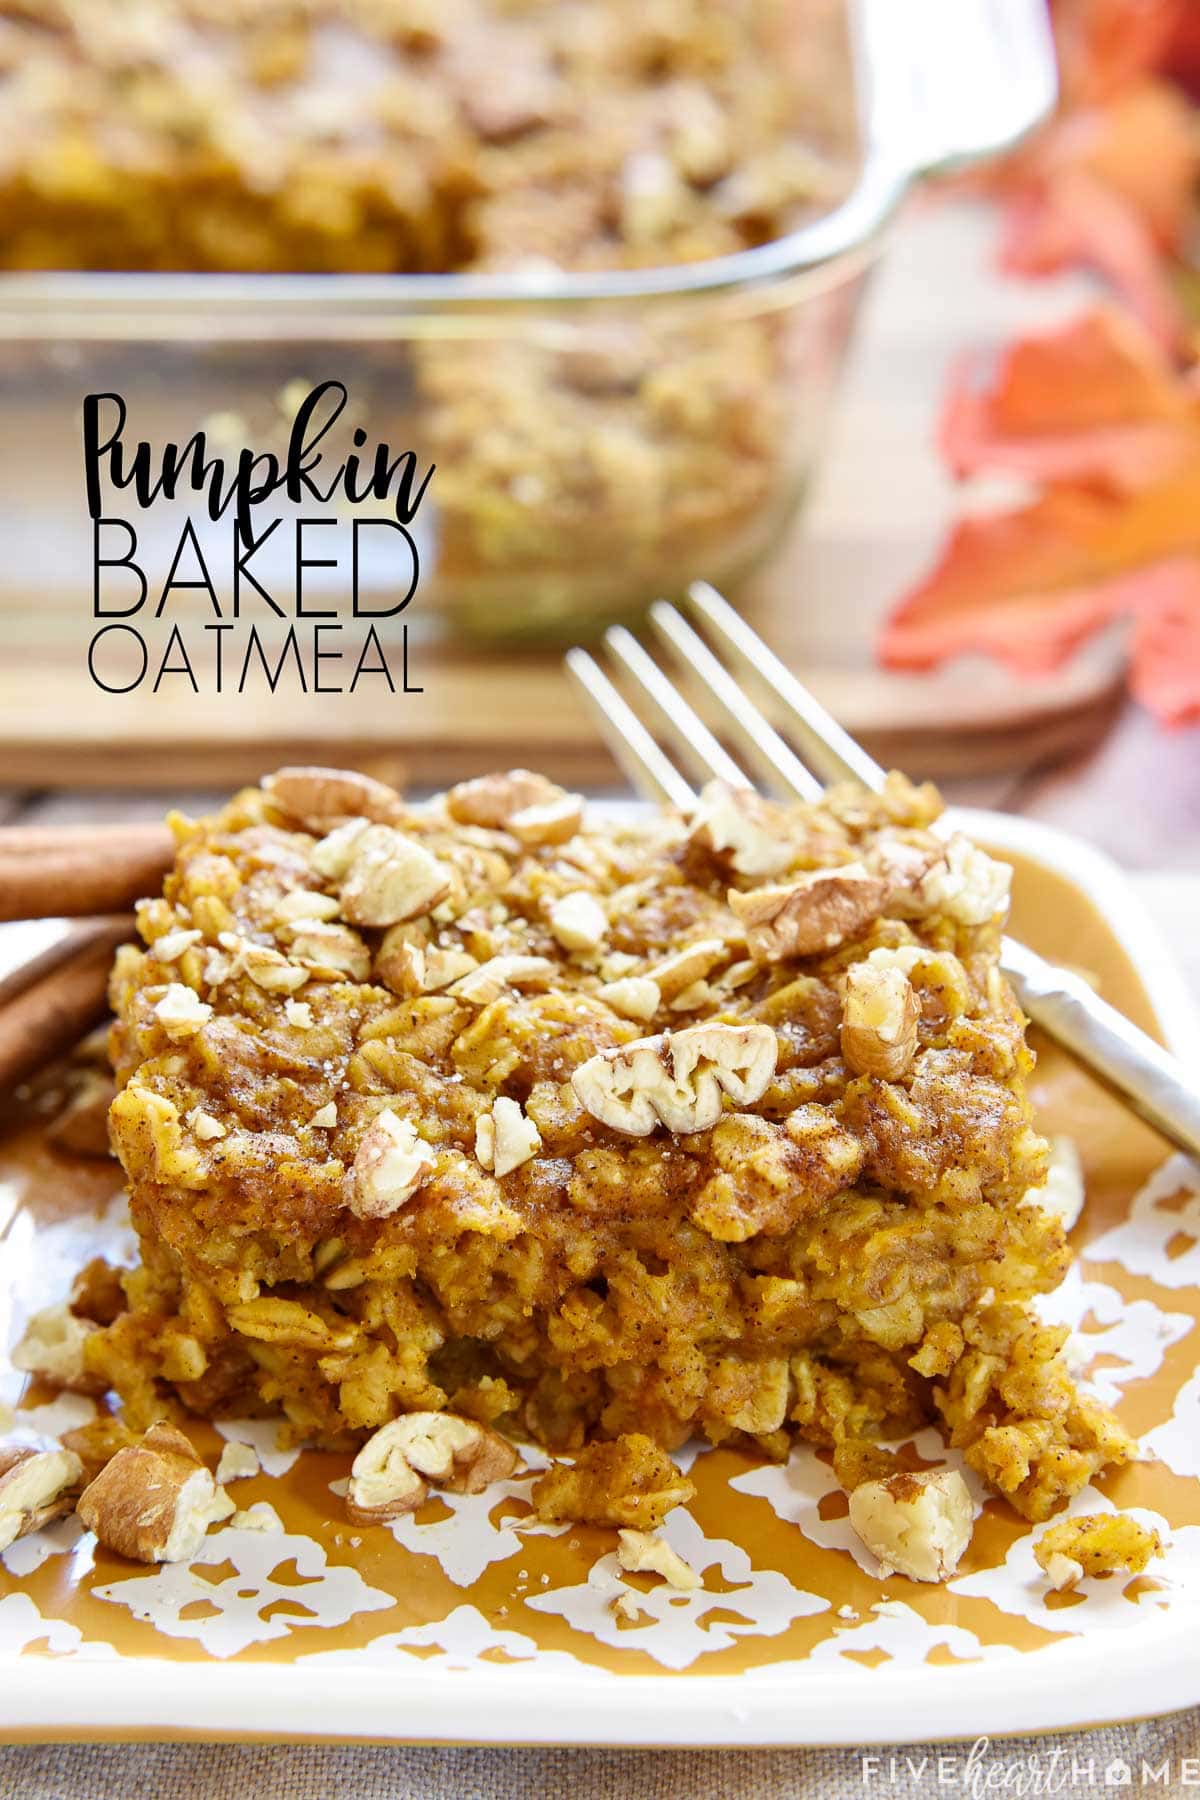 Pumpkin Baked Oatmeal is a warm, filling, wholesome breakfast featuring maple syrup, toasted pecans, cinnamon, and warm spices. It can be made gluten-free and dairy-free, it's perfect for making ahead of time, and it's quick to reheat on busy mornings! | FiveHeartHome.com via @fivehearthome